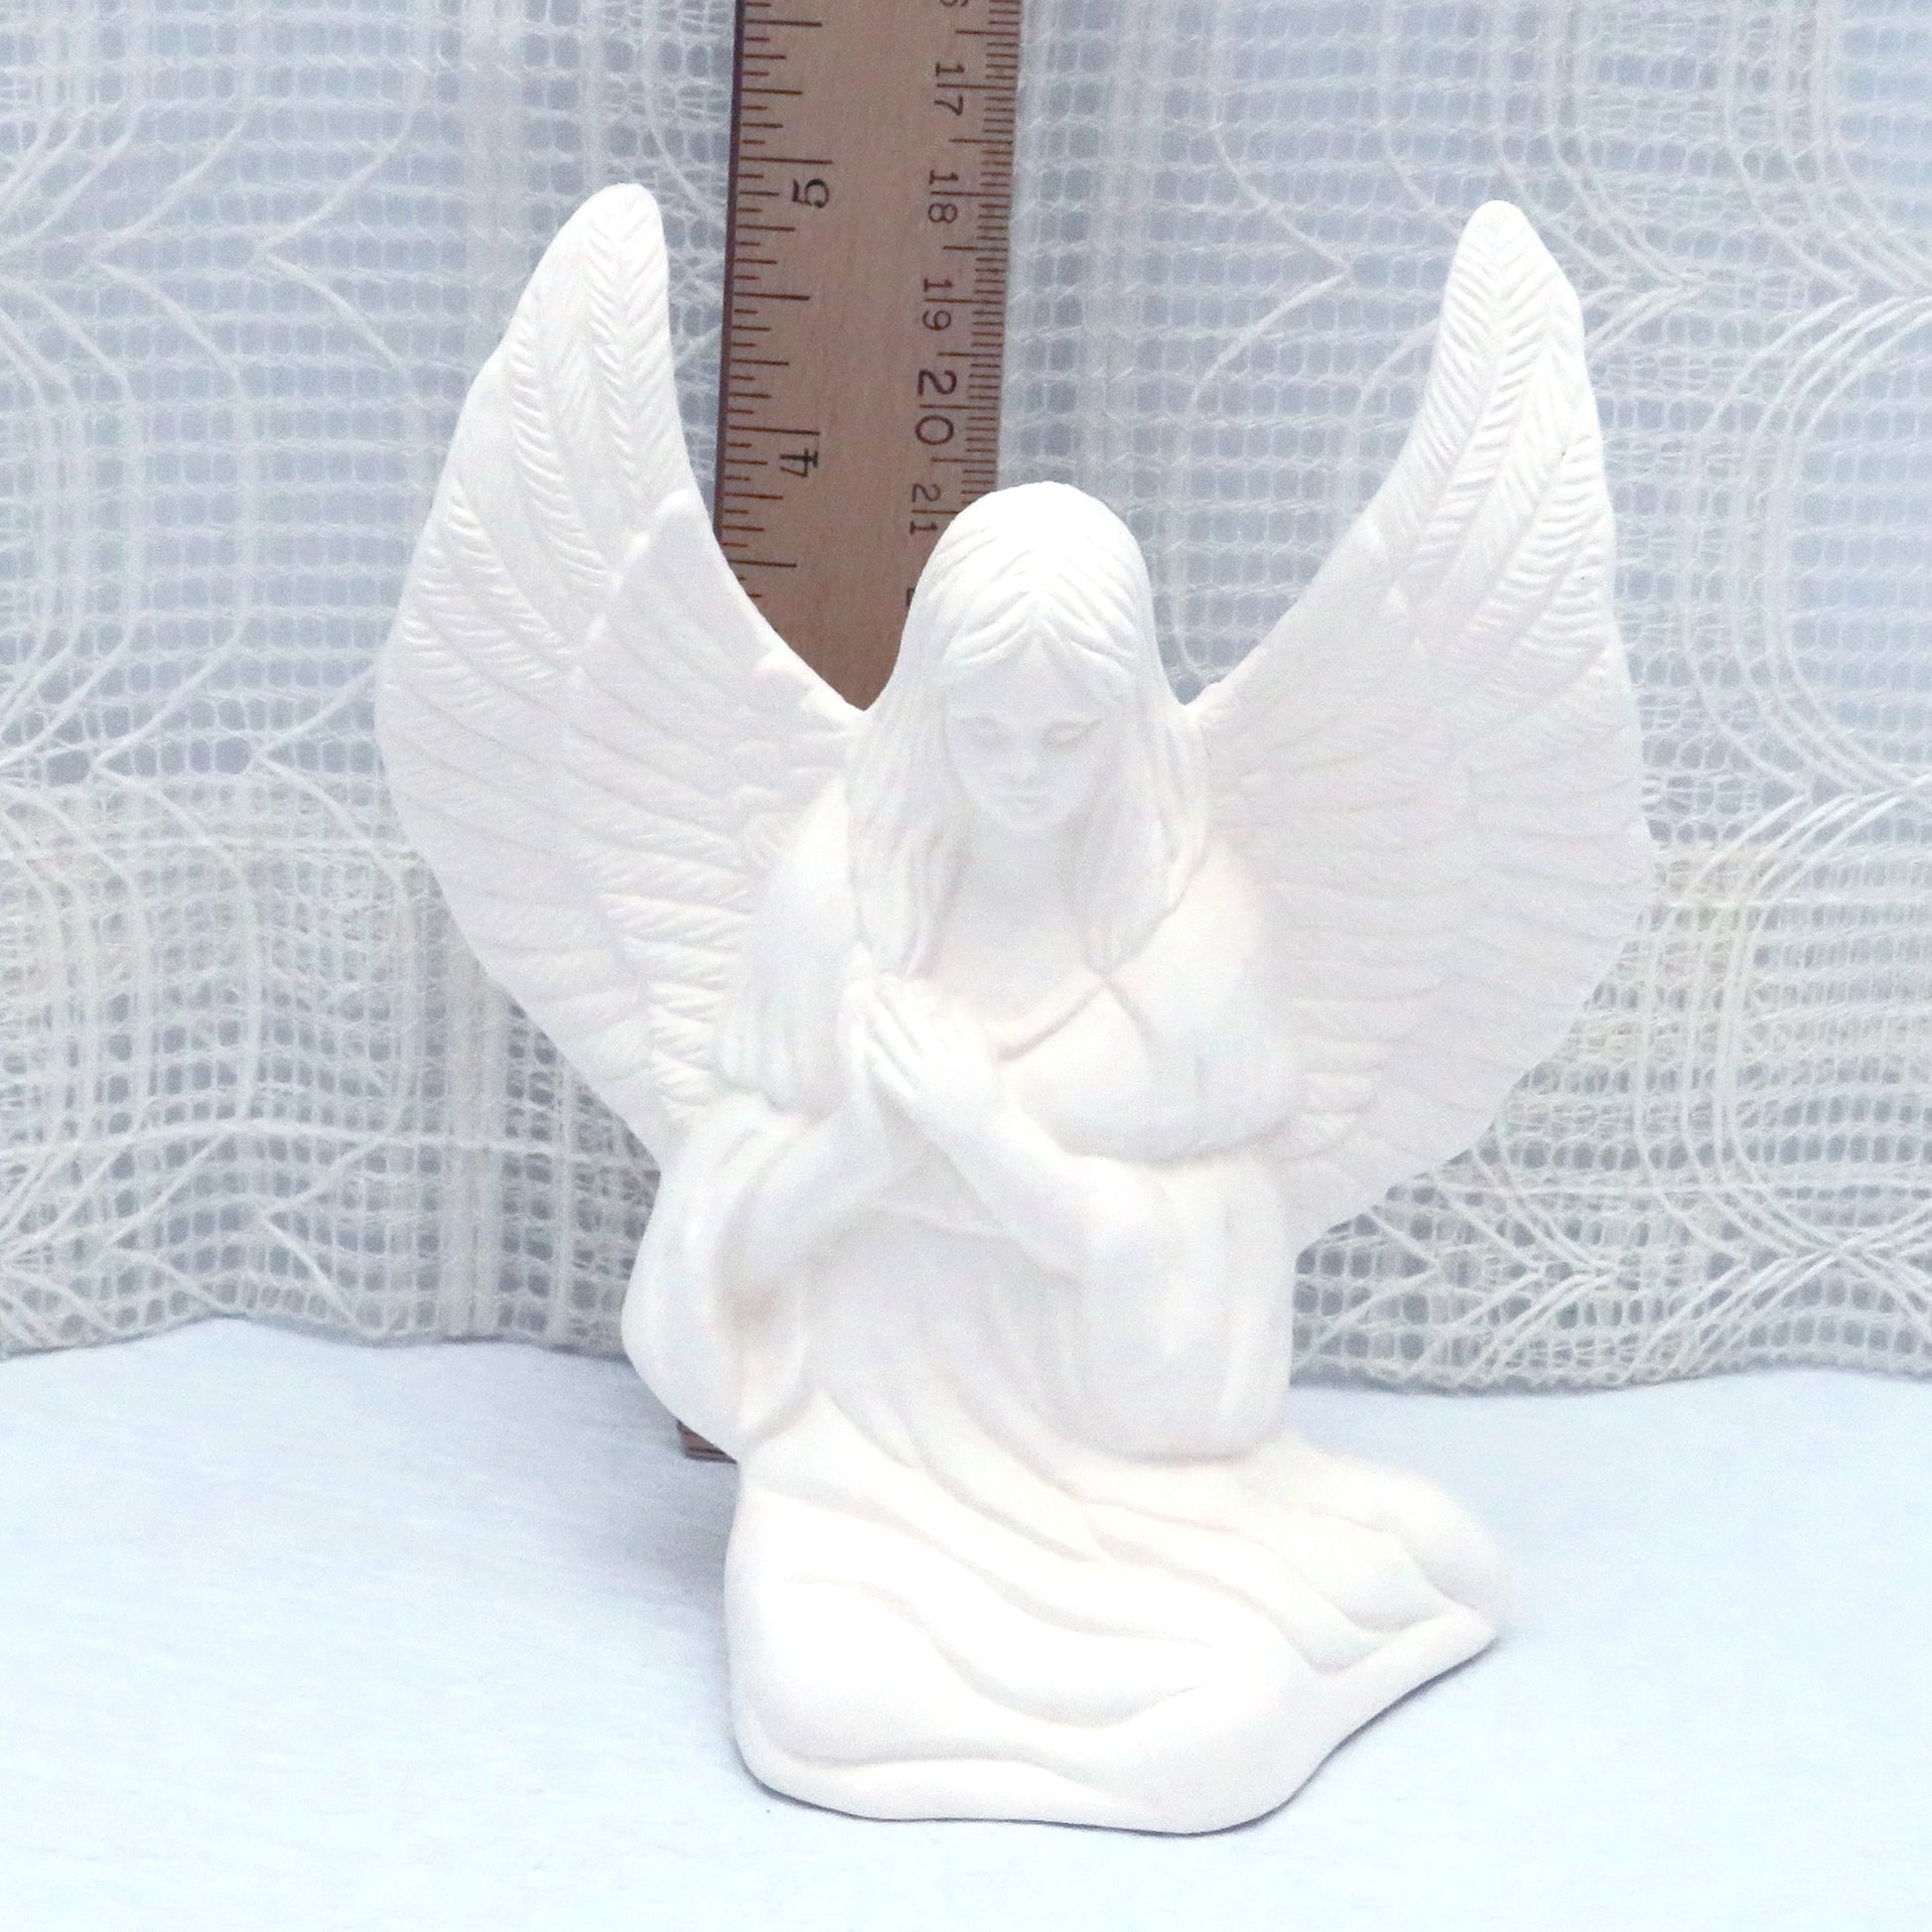 Ceramic angel to paint near a ruler showing her wing to be approximately 5 inches high.